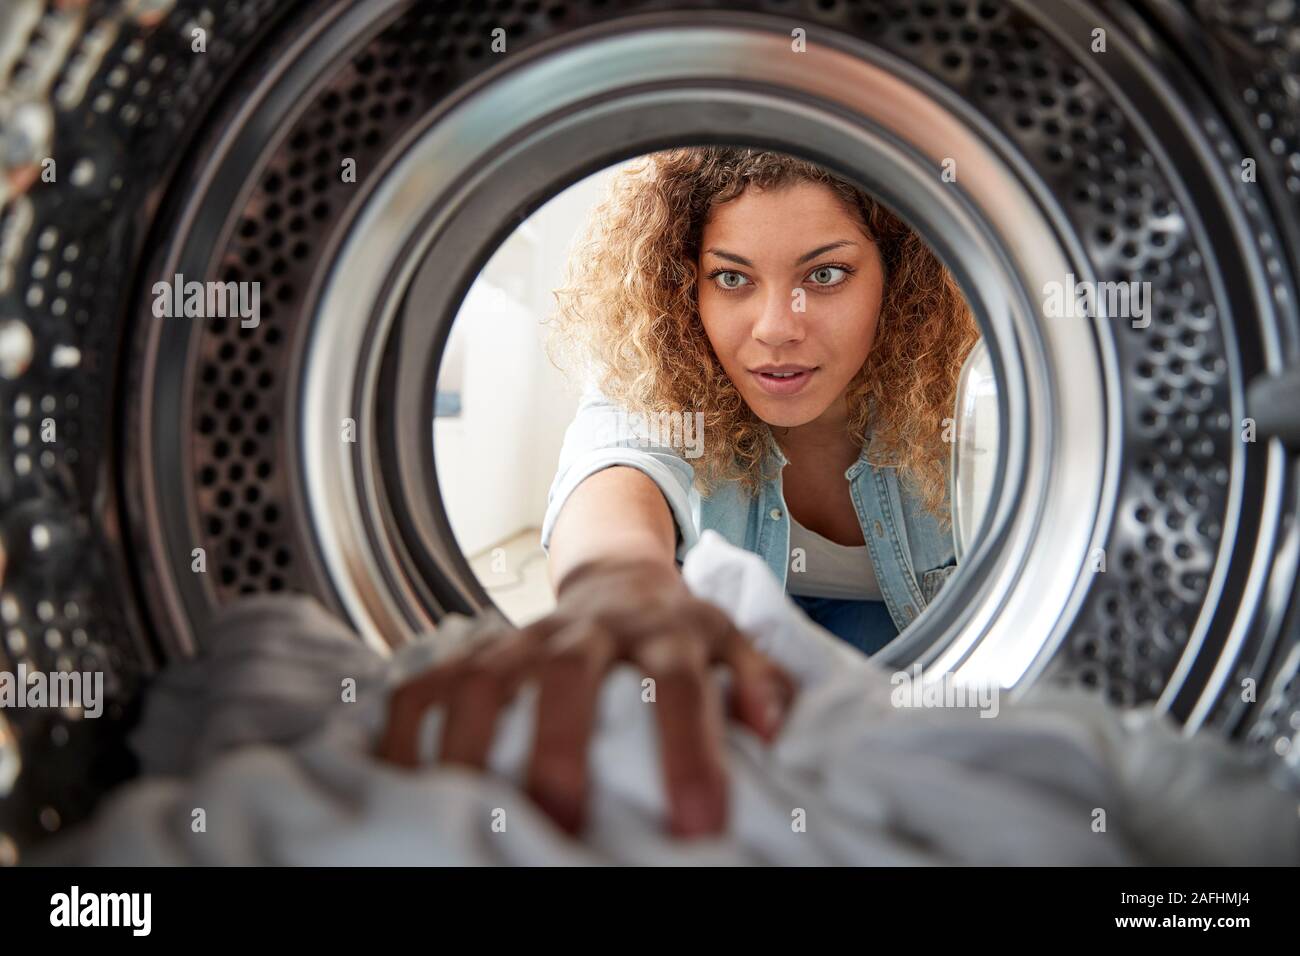 View Looking Out From Inside Washing Machine As Woman Does White Laundry Stock Photo